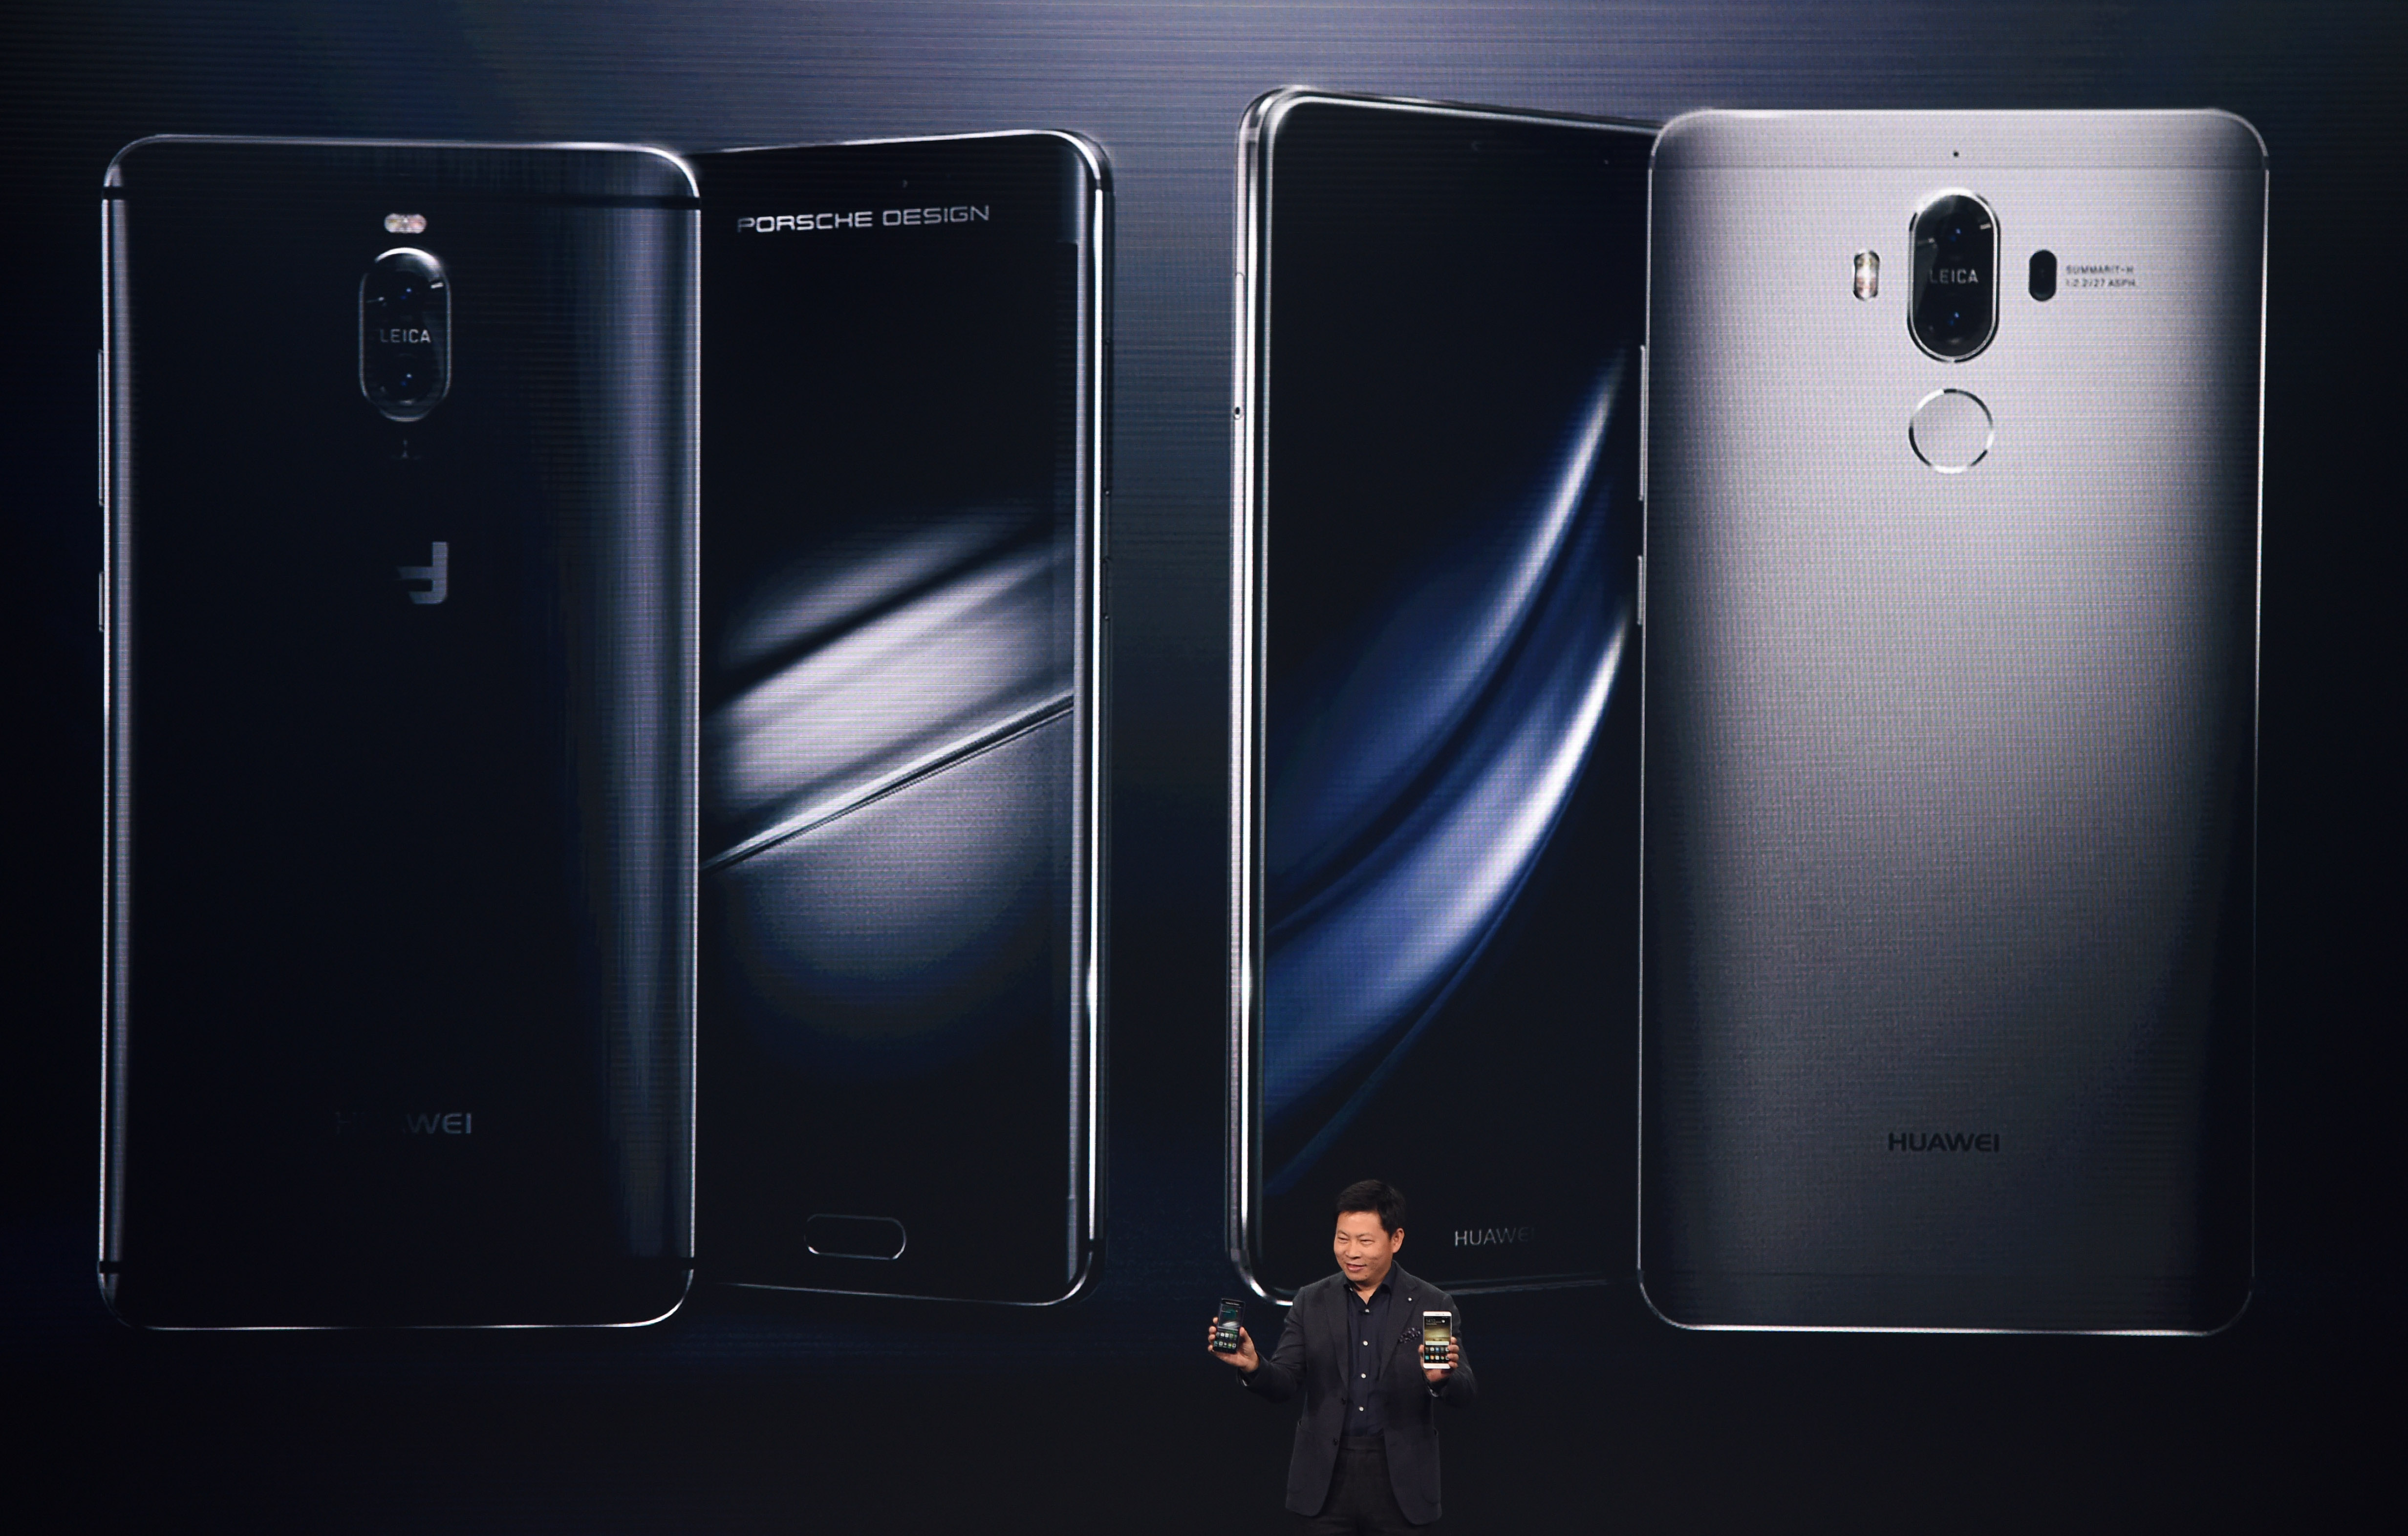 Richard Yu, CEO of Huawei Consumer Business Group, presents the new Huawei Mate 9 high-end-phablet during the Huawei Global Product Launch in Munich, southern Germany, on November 3, 2016.  / AFP PHOTO / CHRISTOF STACHE